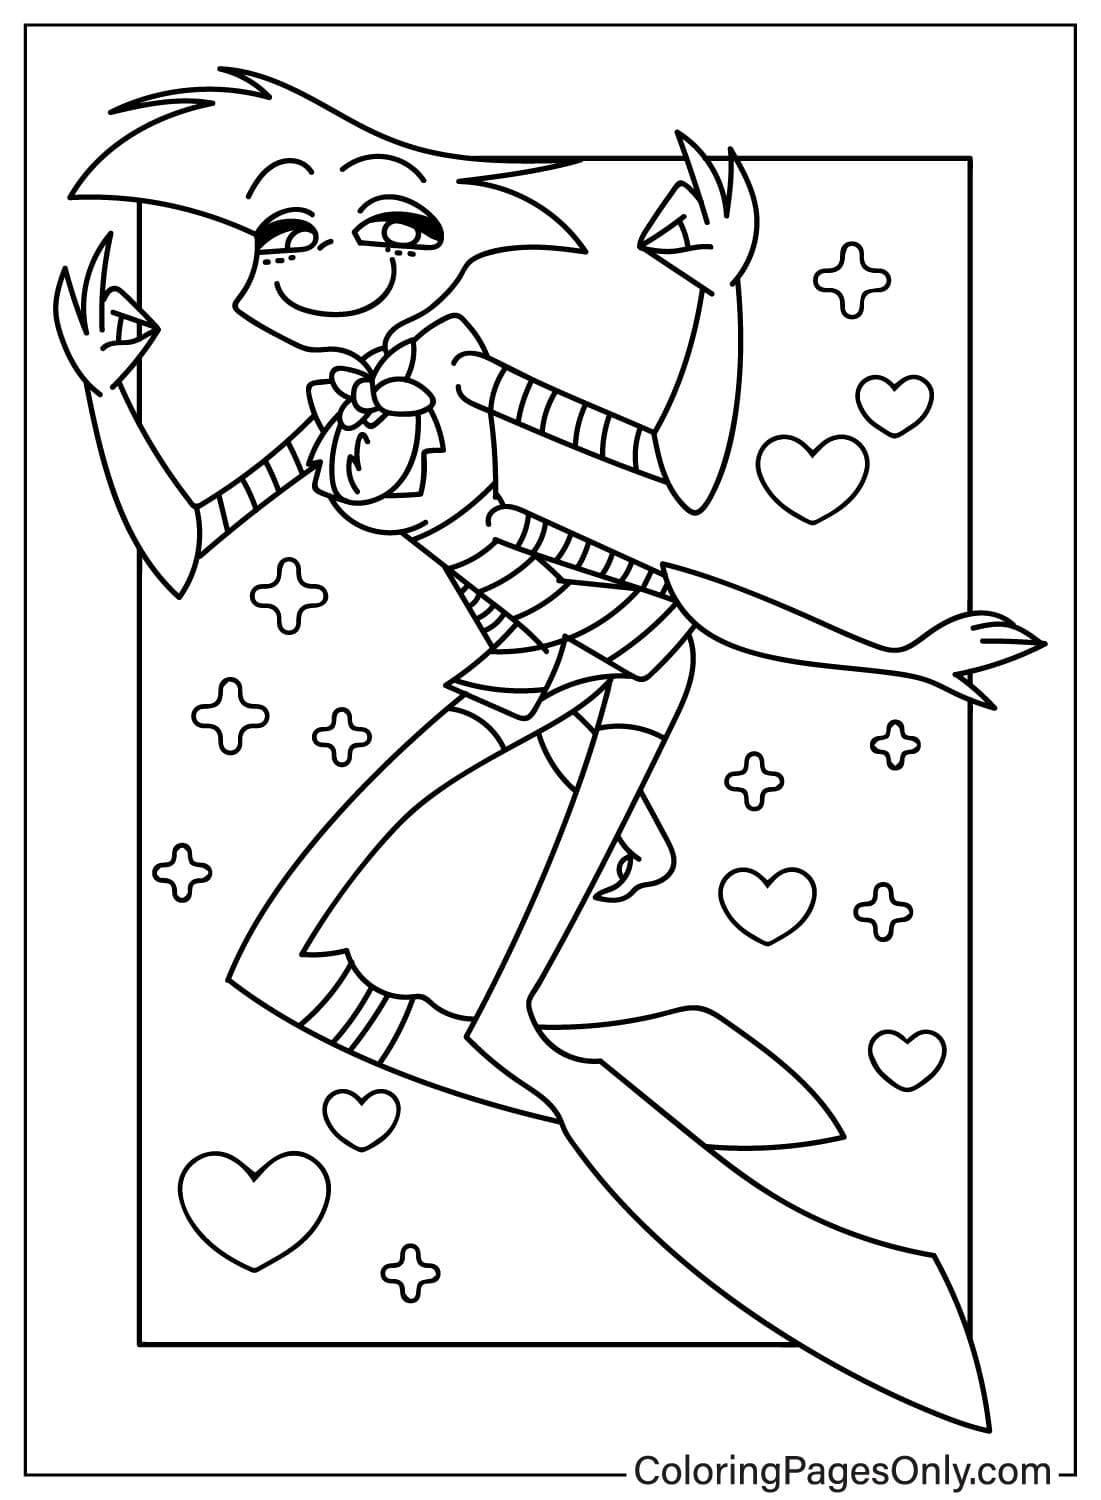 Angel Dust from Hazbin Hotel Coloring Page from Angel Dust